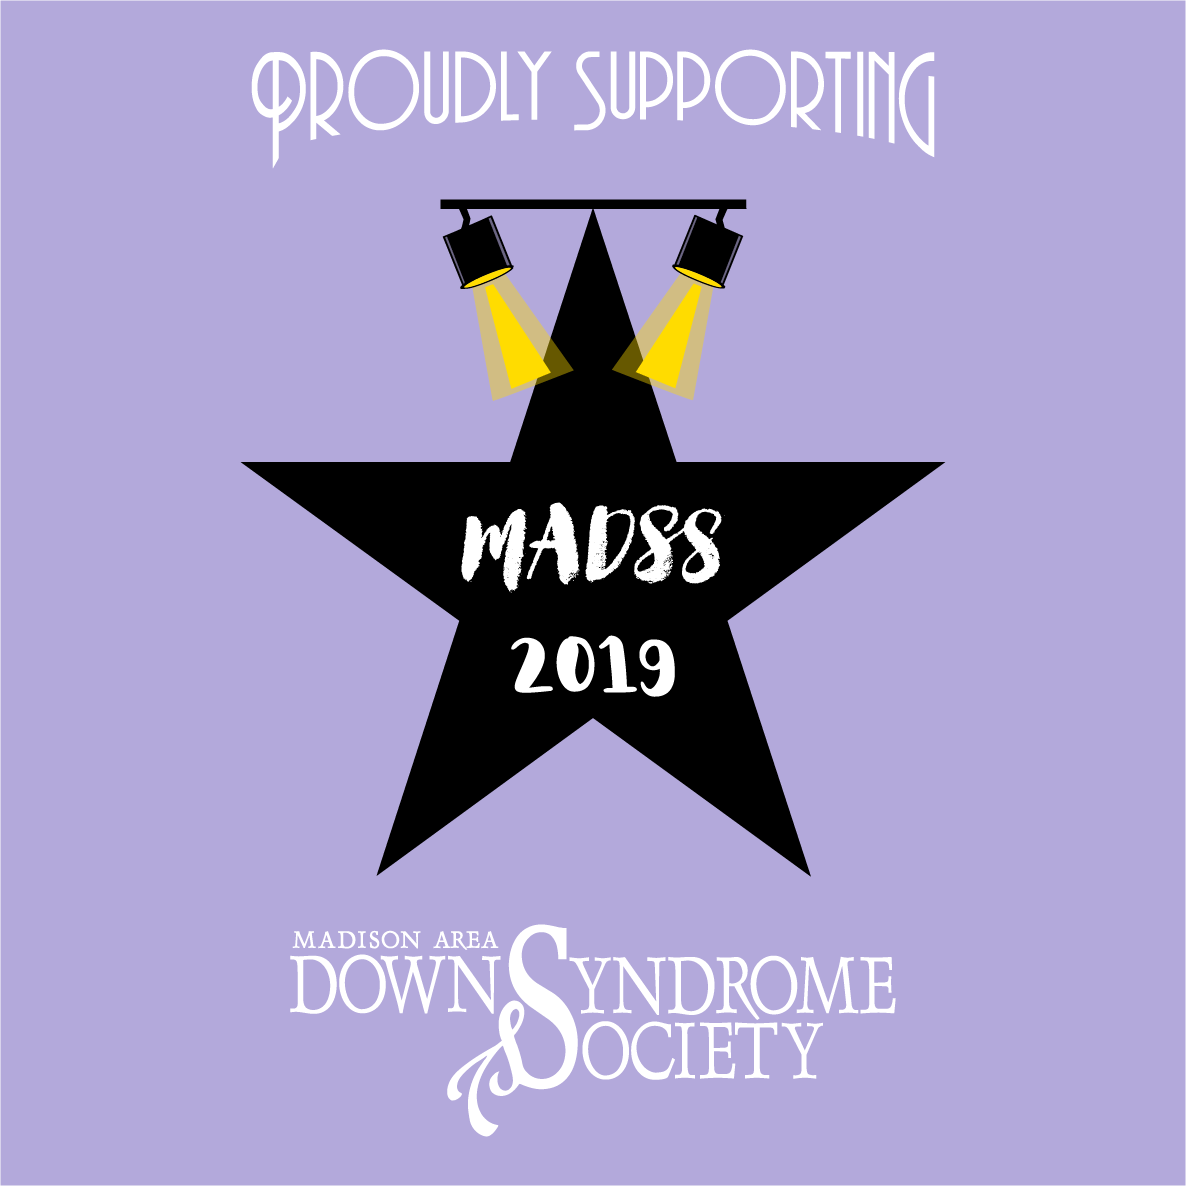 Madison Area Down Syndrome Society and Pike Hollywood shirt design - zoomed